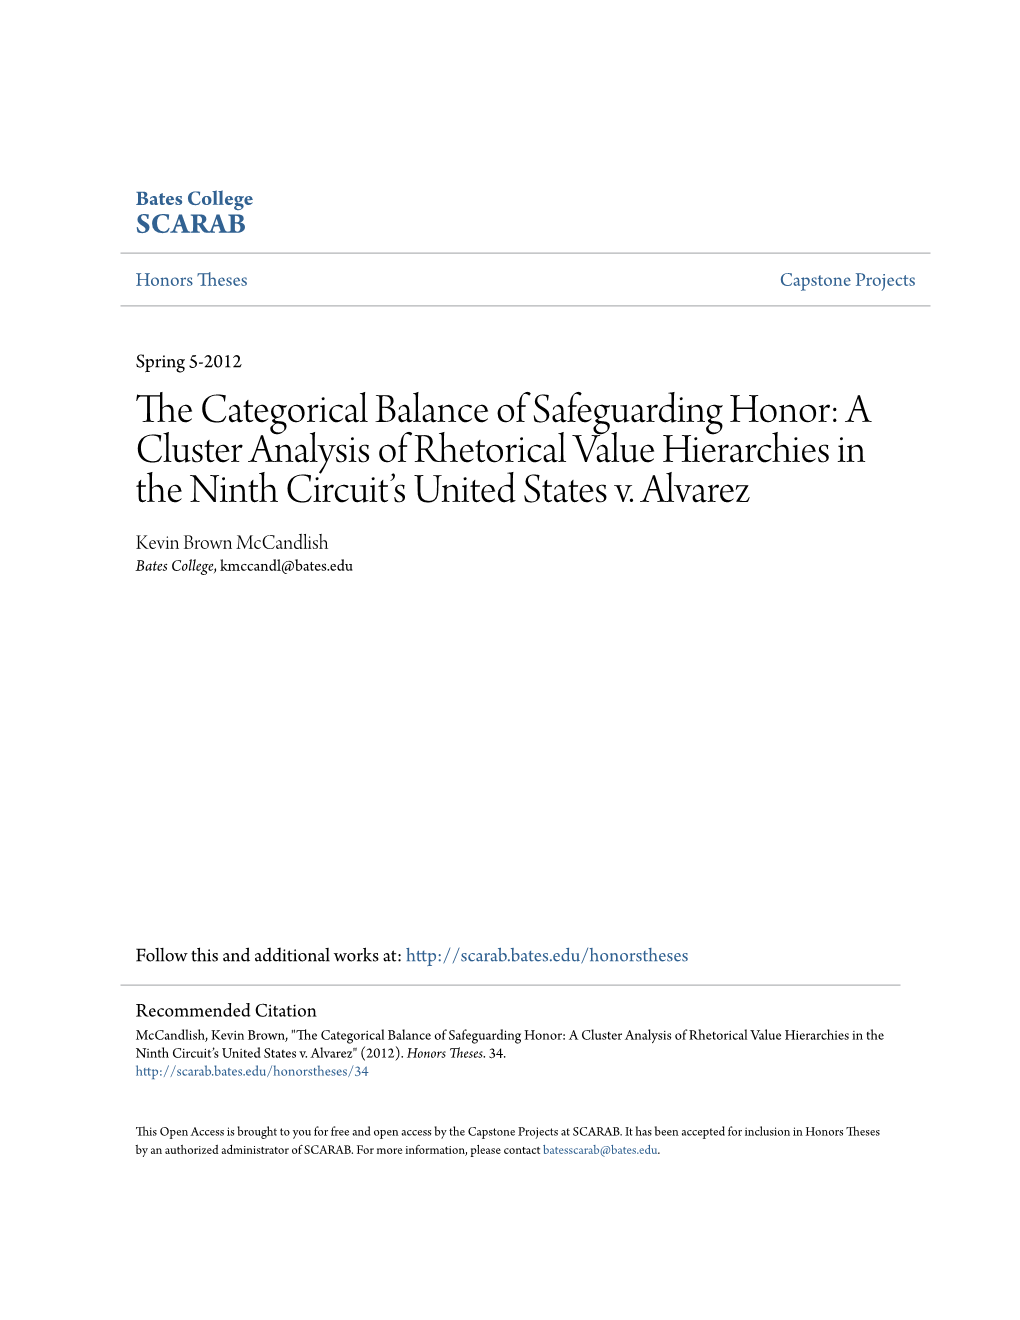 The Categorical Balance of Safeguarding Honor: a Cluster Analysis of Rhetorical Value Hierarchies in the Ninth Circuit’S United States V